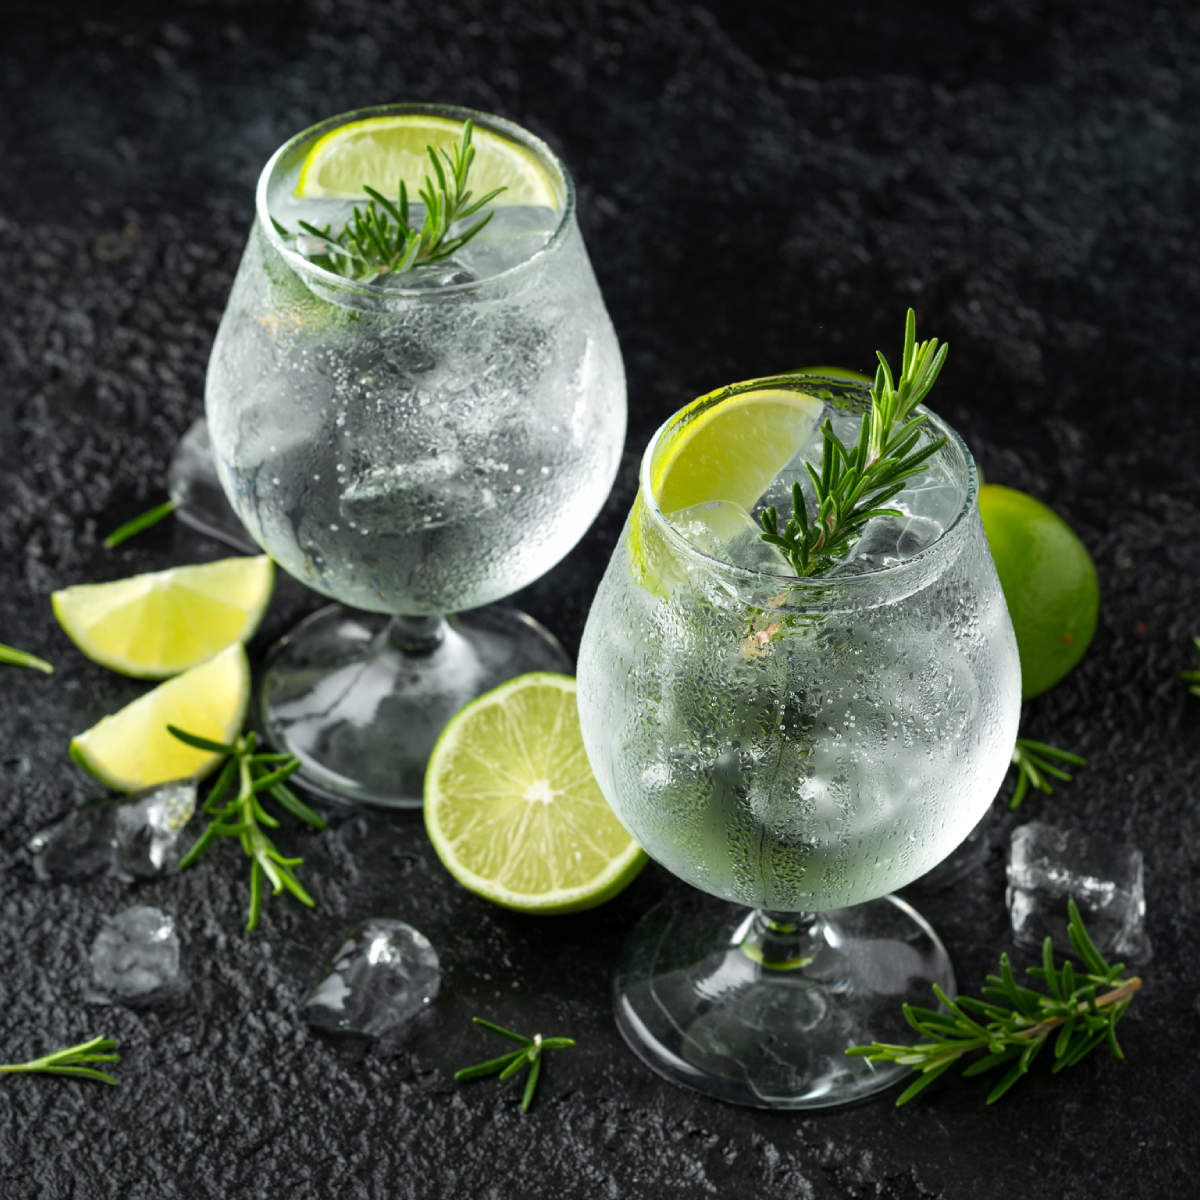 Gin and Tonic Recipe: How to Make Gin and Tonic Recipe